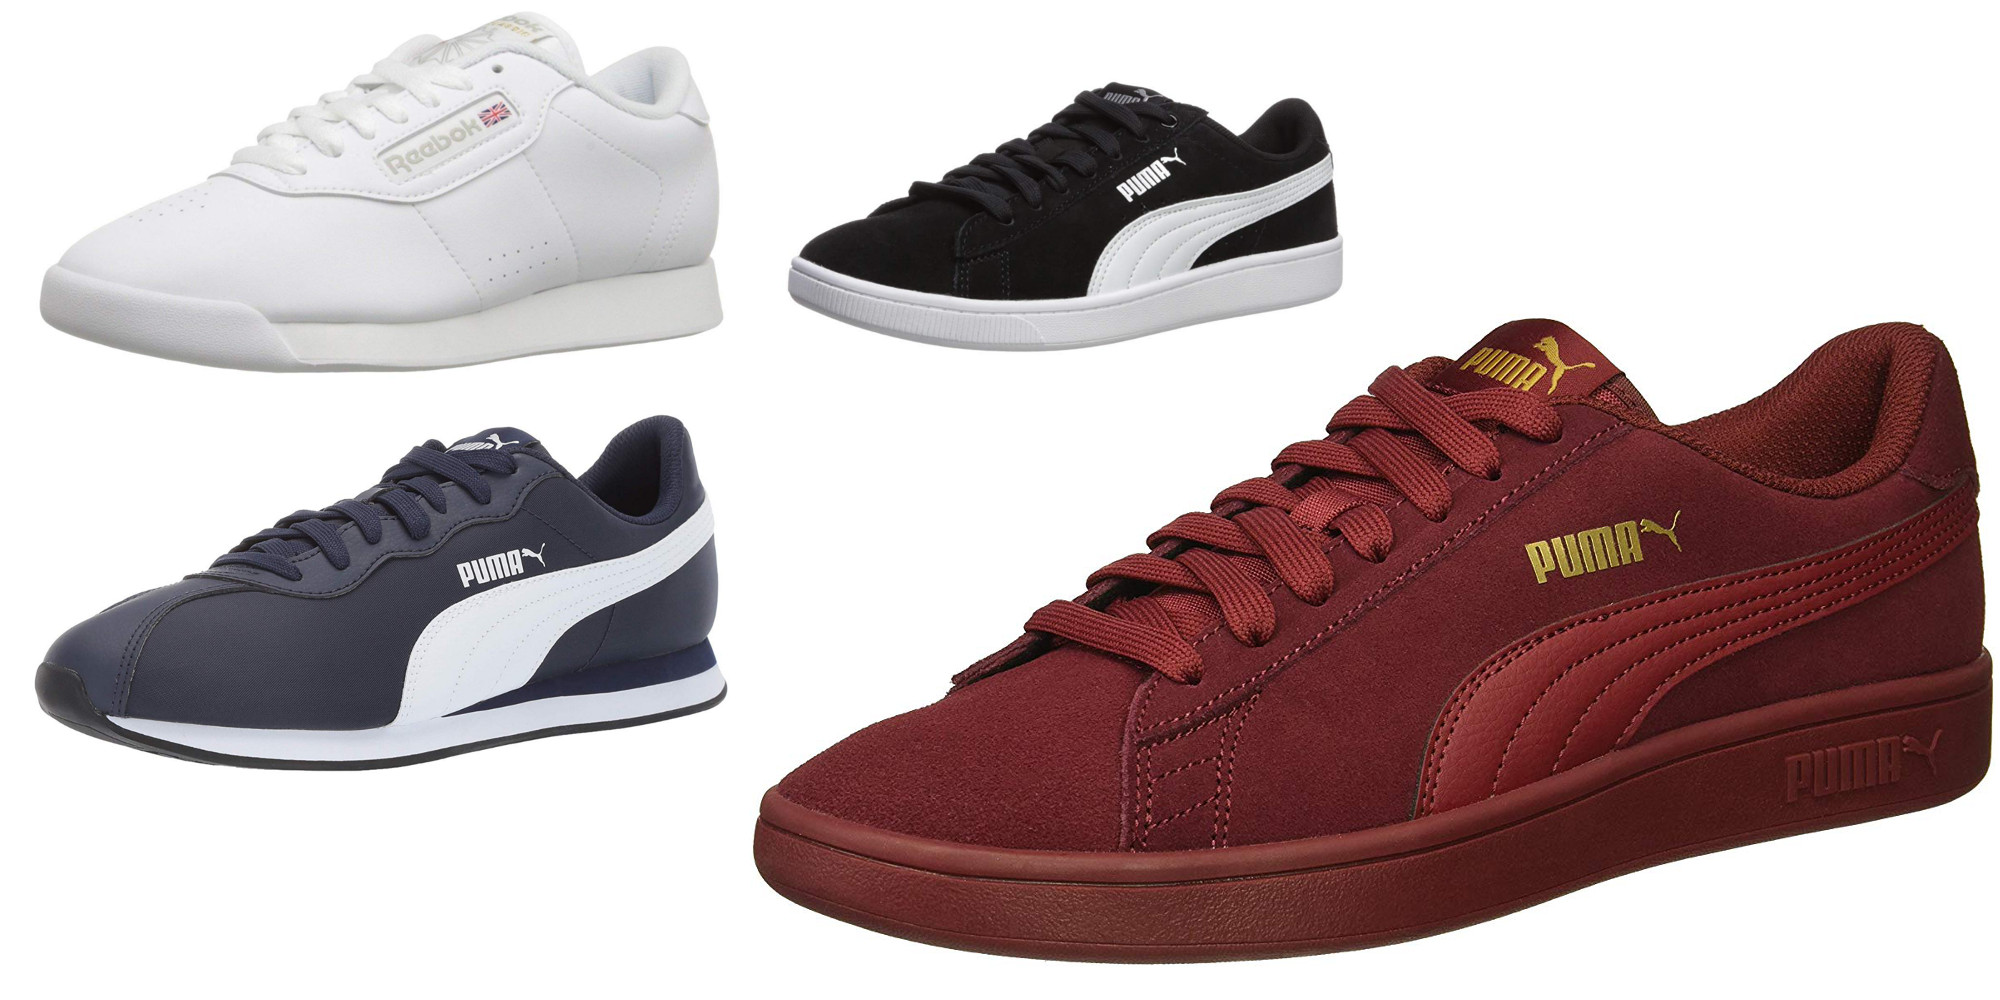 Classic Reebok and PUMA sneakers from $22.50 for Prime members (Up to 50%  off) - 9to5Toys